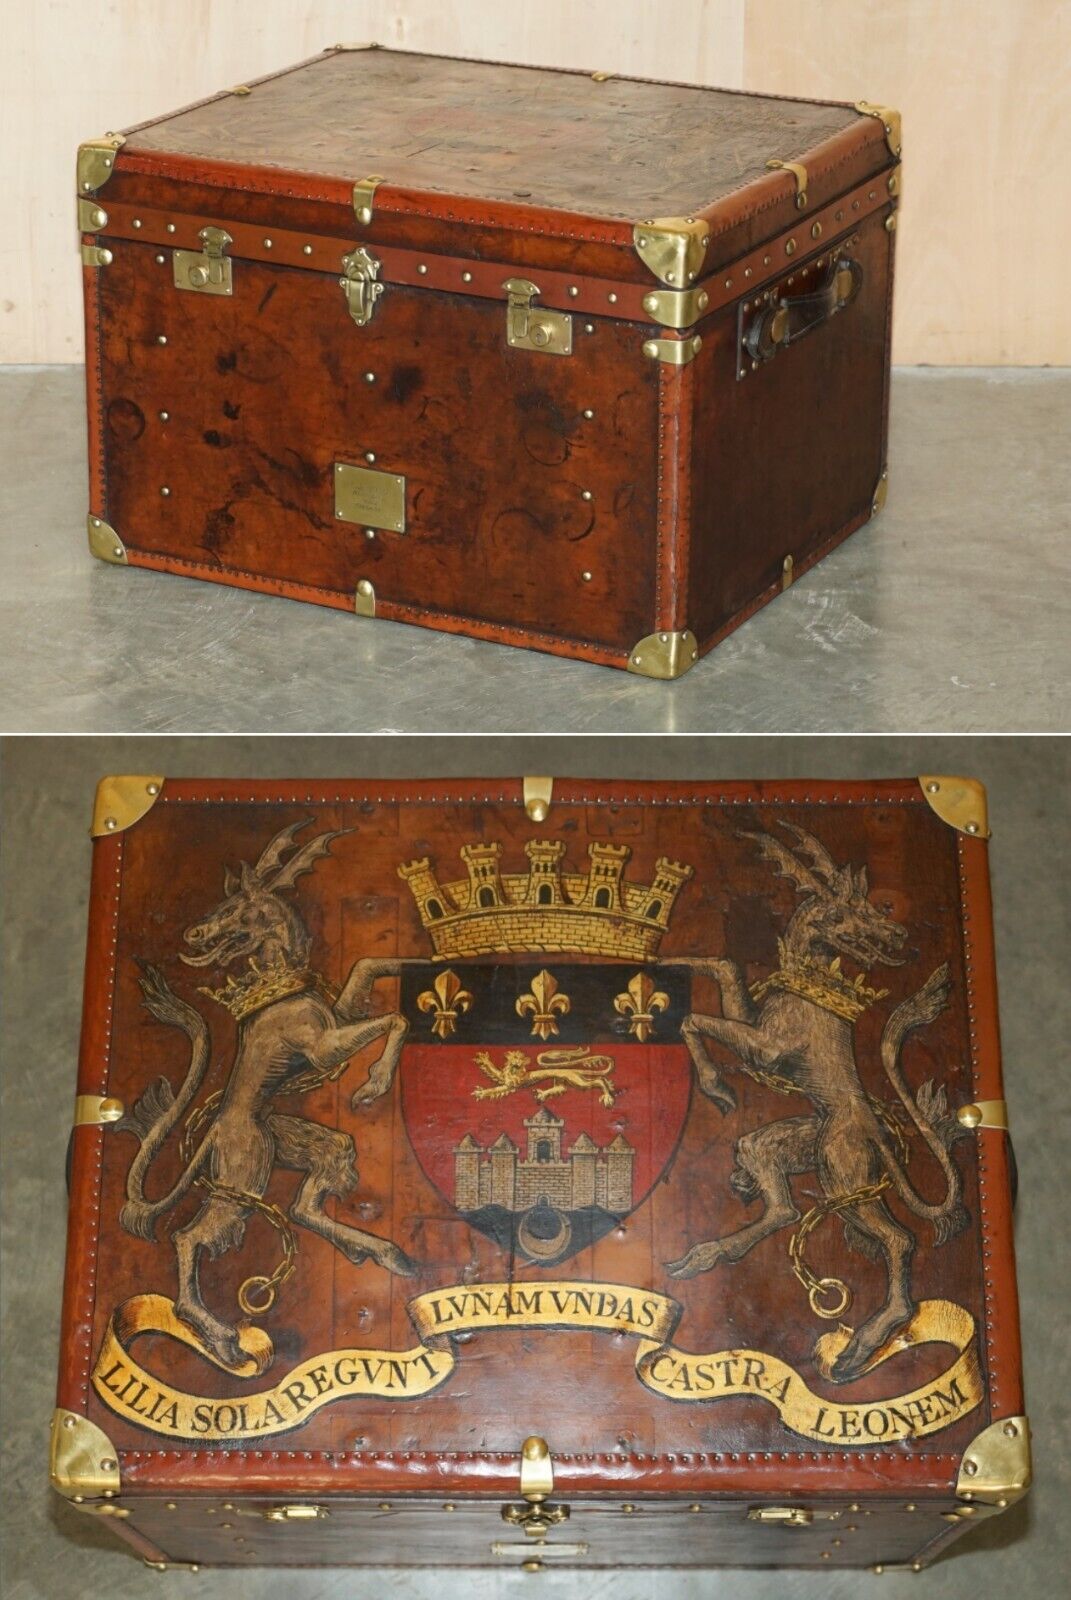 ONE OF A KIND ANTIQUE BROWN LEATHER STEAMER TRUNK WITH ARMORIAL COAT OF ARMS